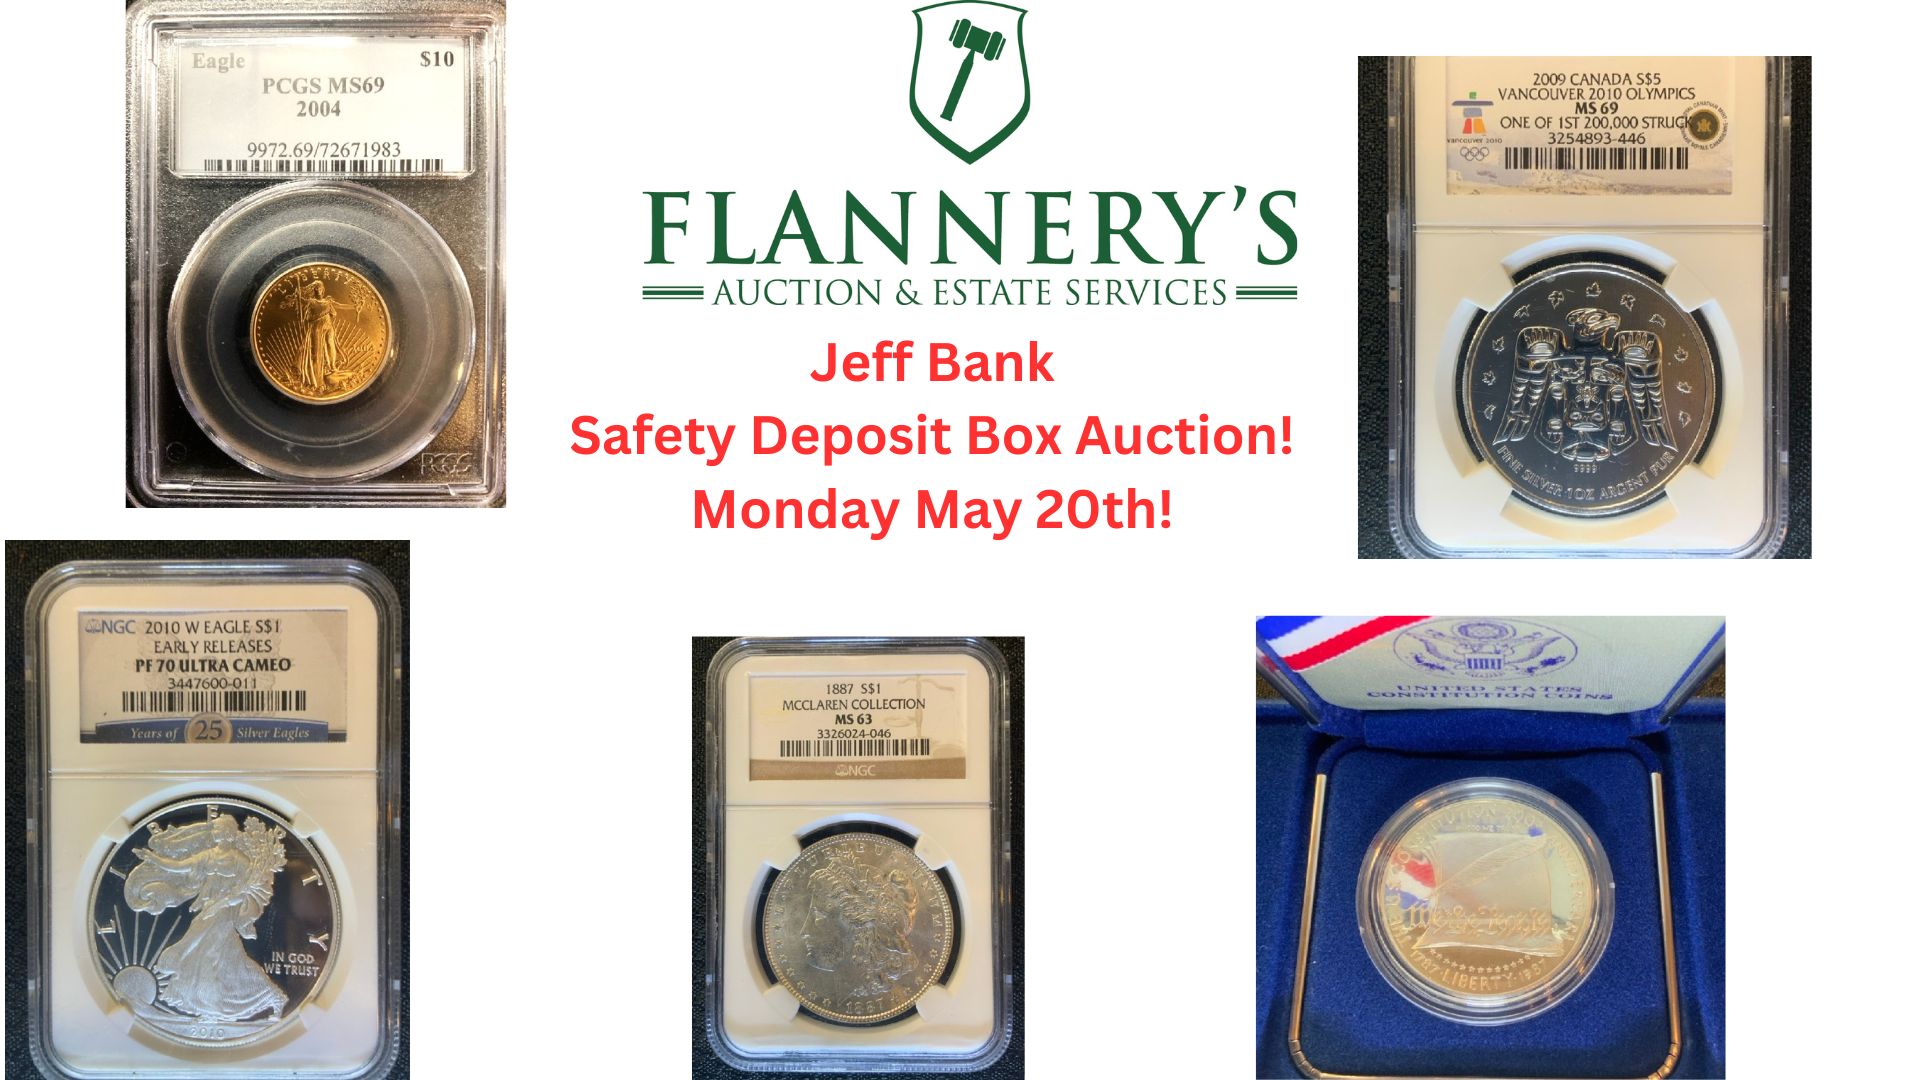 Jeff Bank Safety Deposit Box Contents - Coins